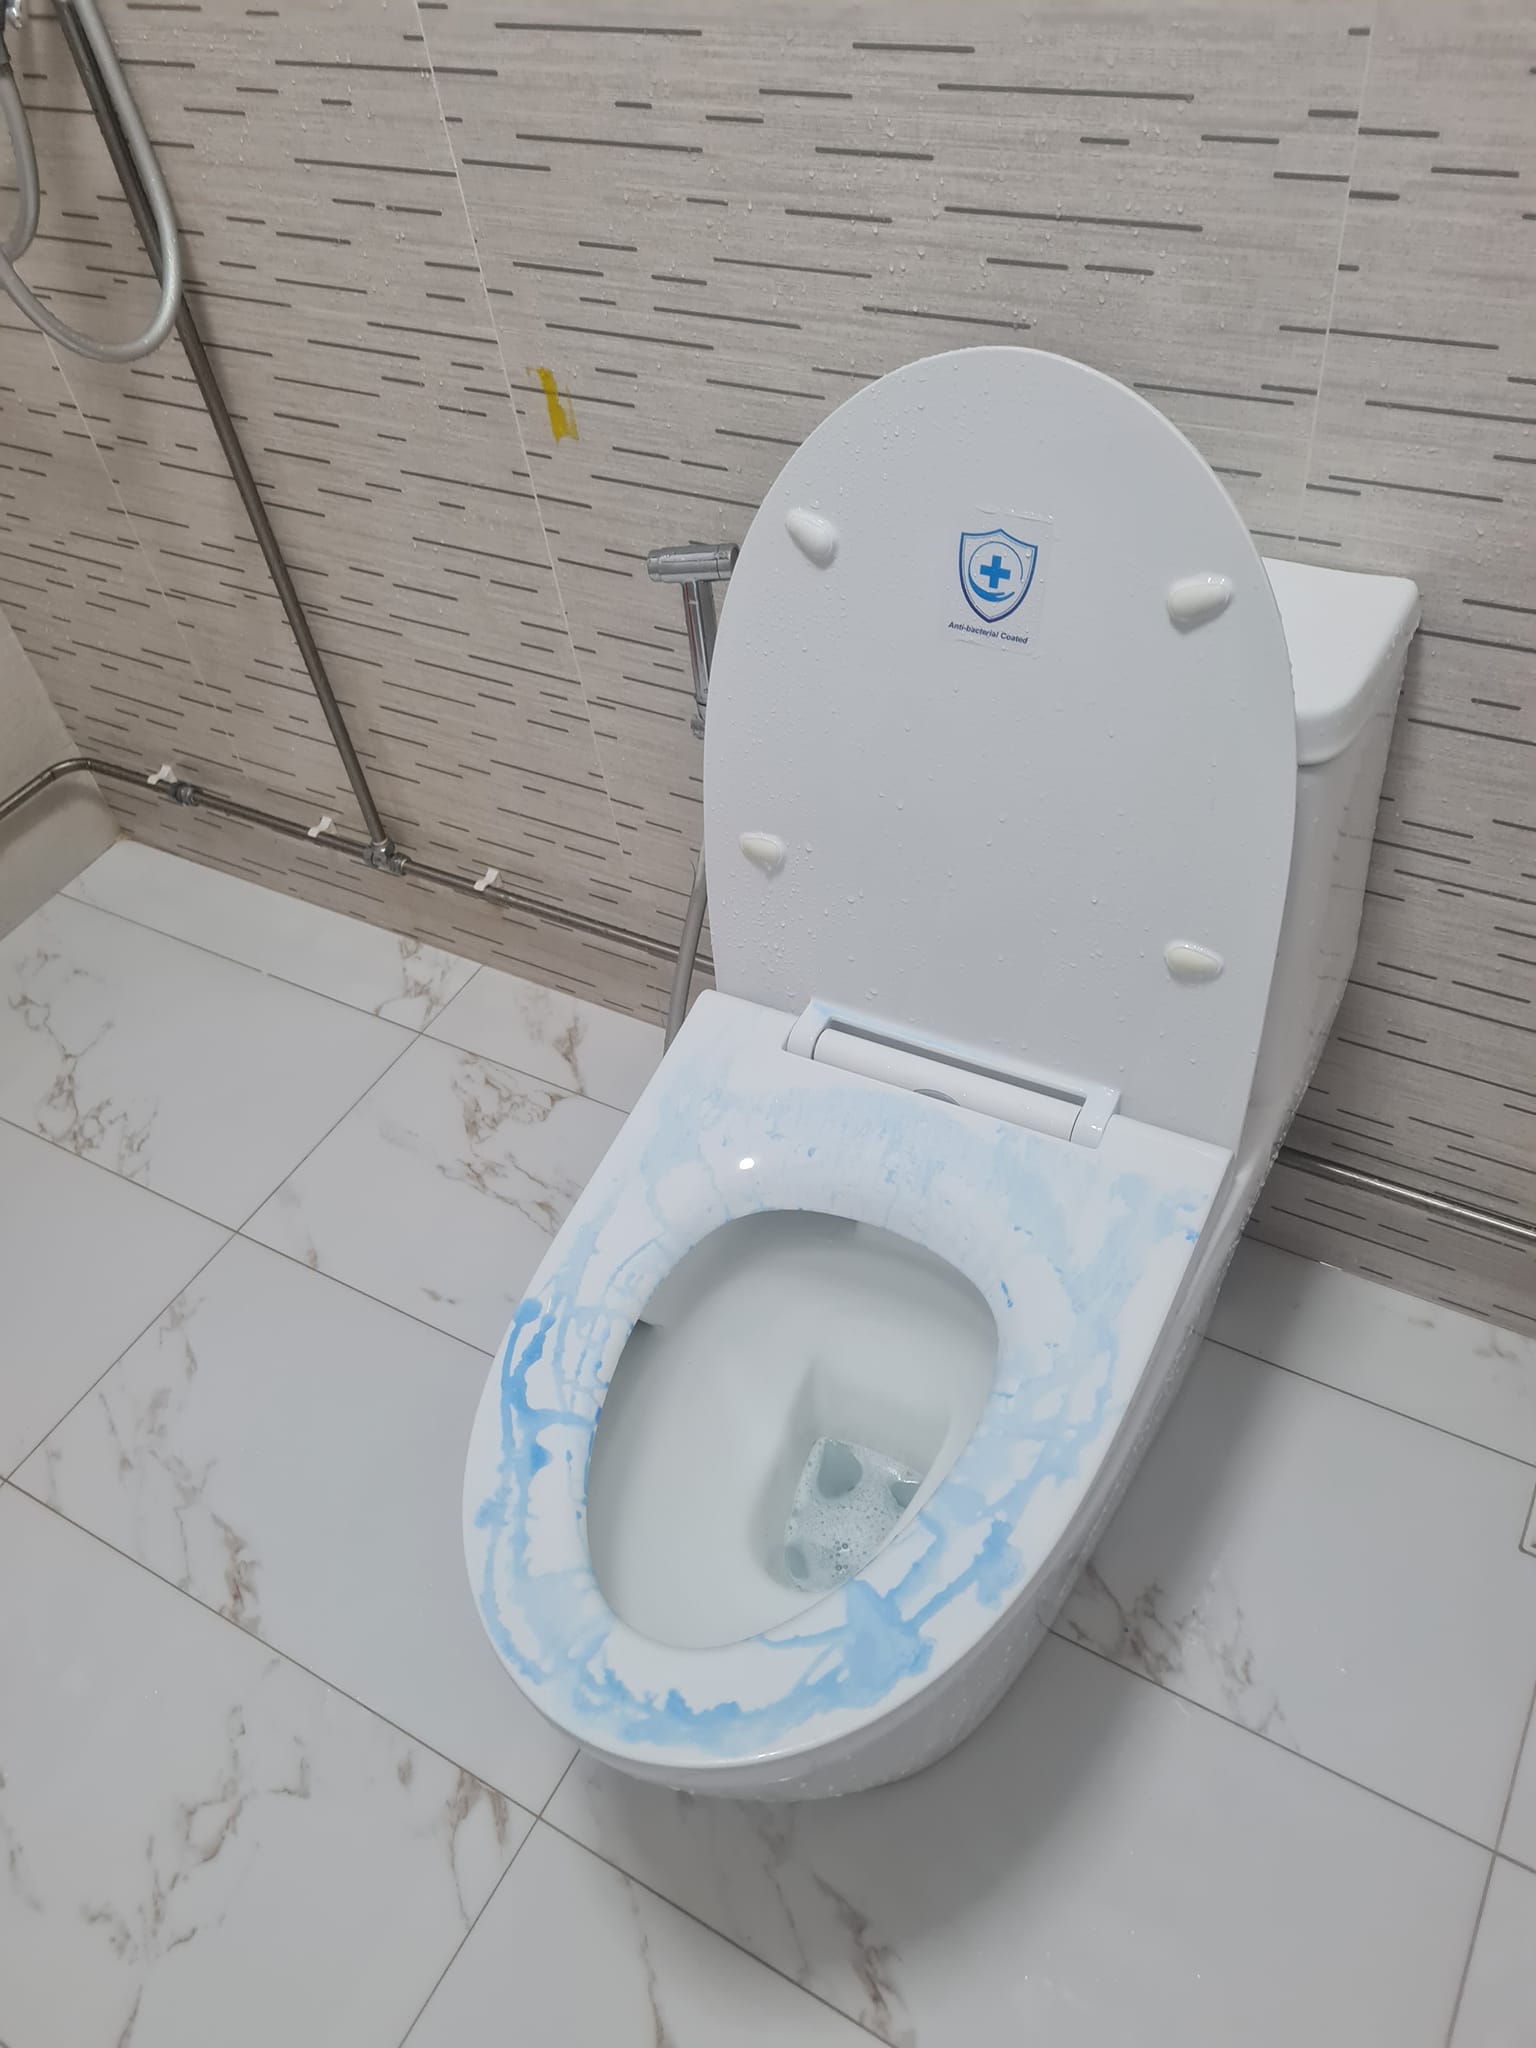 Sg woman's toilet seat turns blue after grandma soaked it overnight with stain remover | weirdkaya